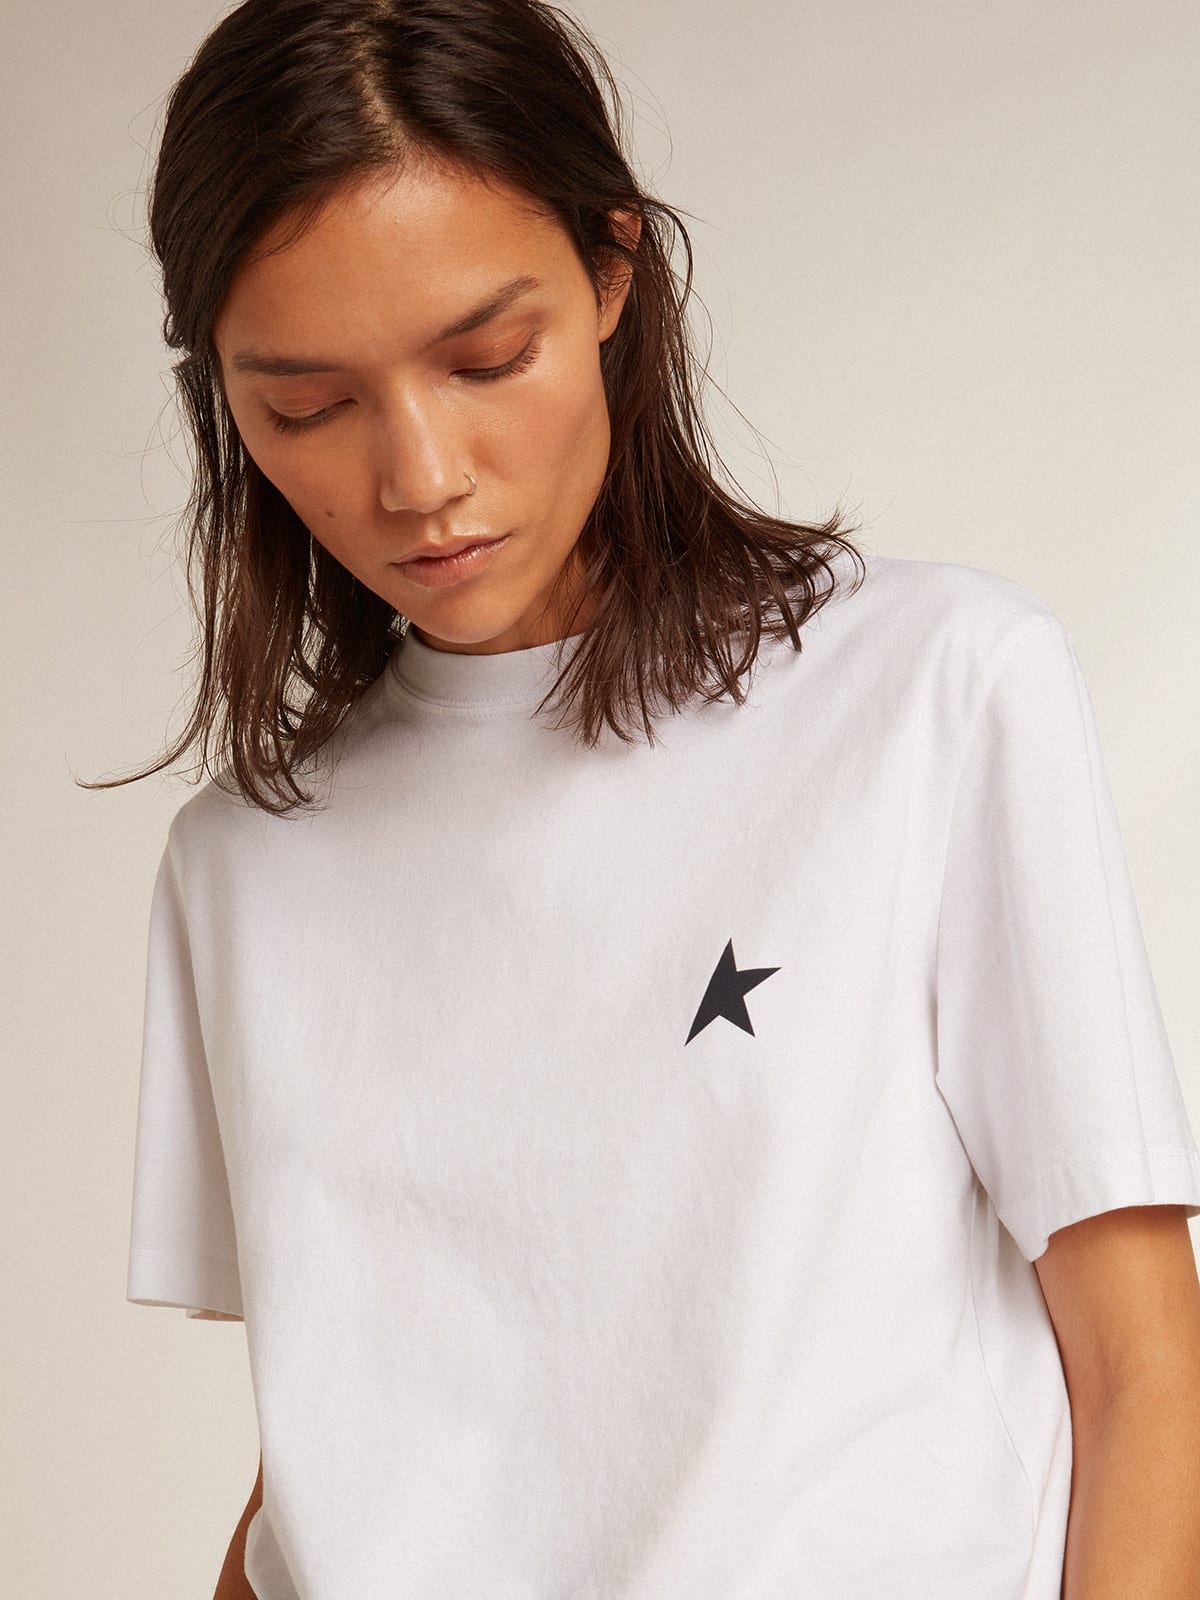 Women’s white T-shirt with dark blue star on the front - 2